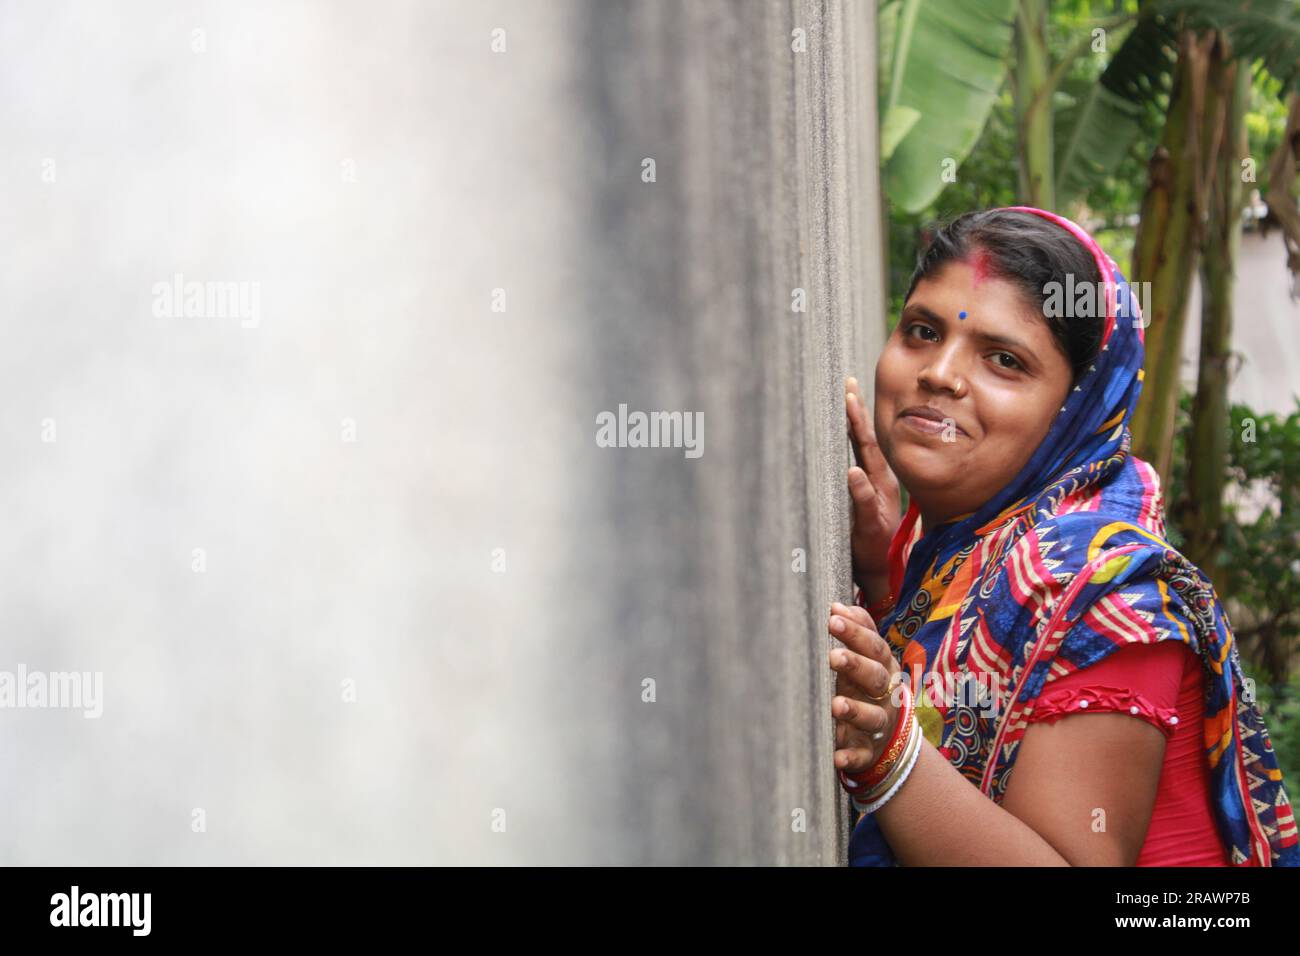 Young indian woman against a grunge wall, smiling and happy, being confident and friendly. Stock Photo